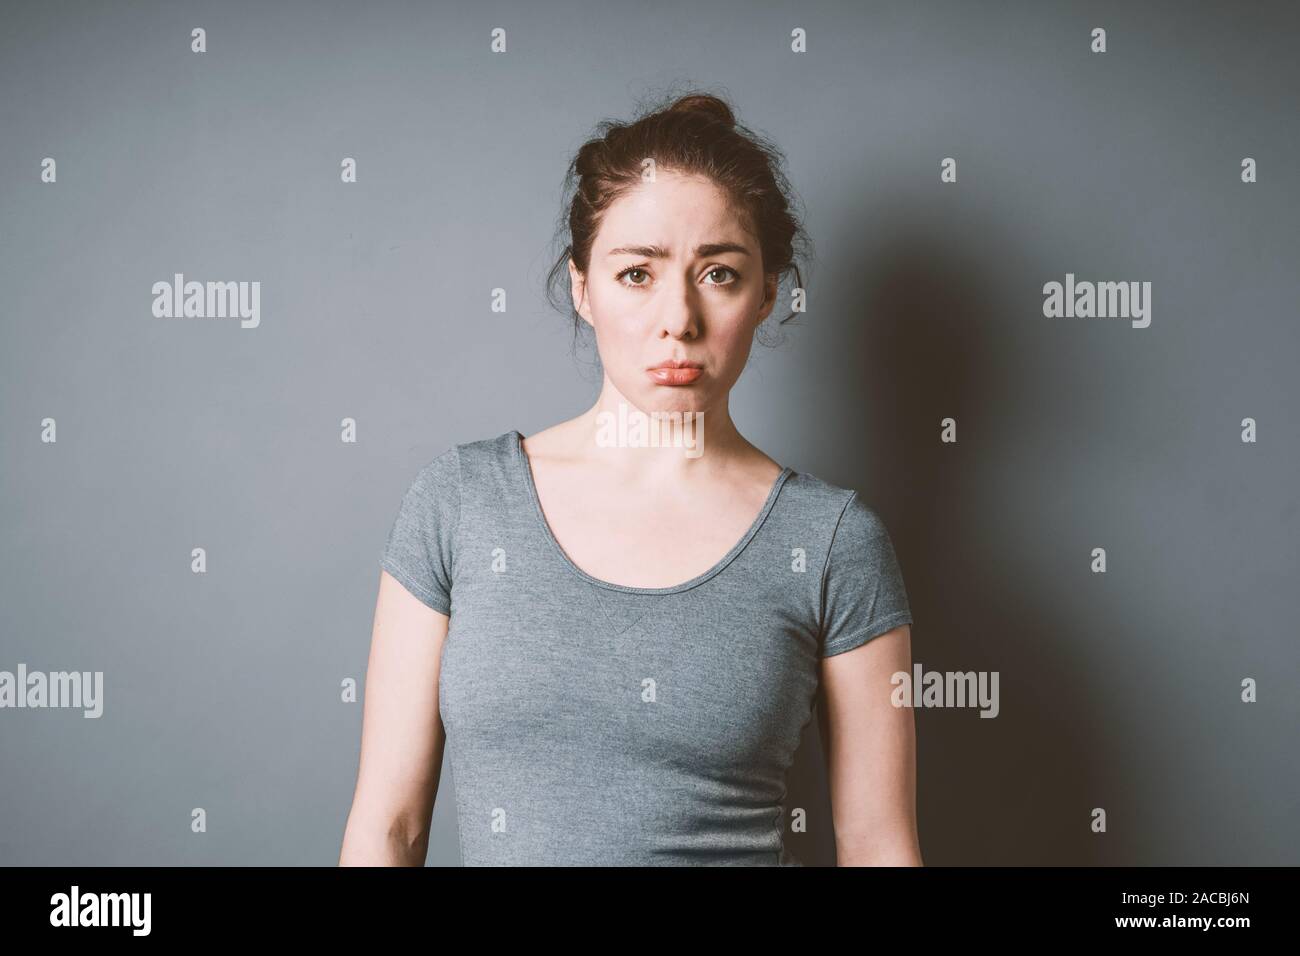 sulky pouting young woman in her 20s feeling letdown and disappointment - negative emotion bad mood concept with copy space Stock Photo